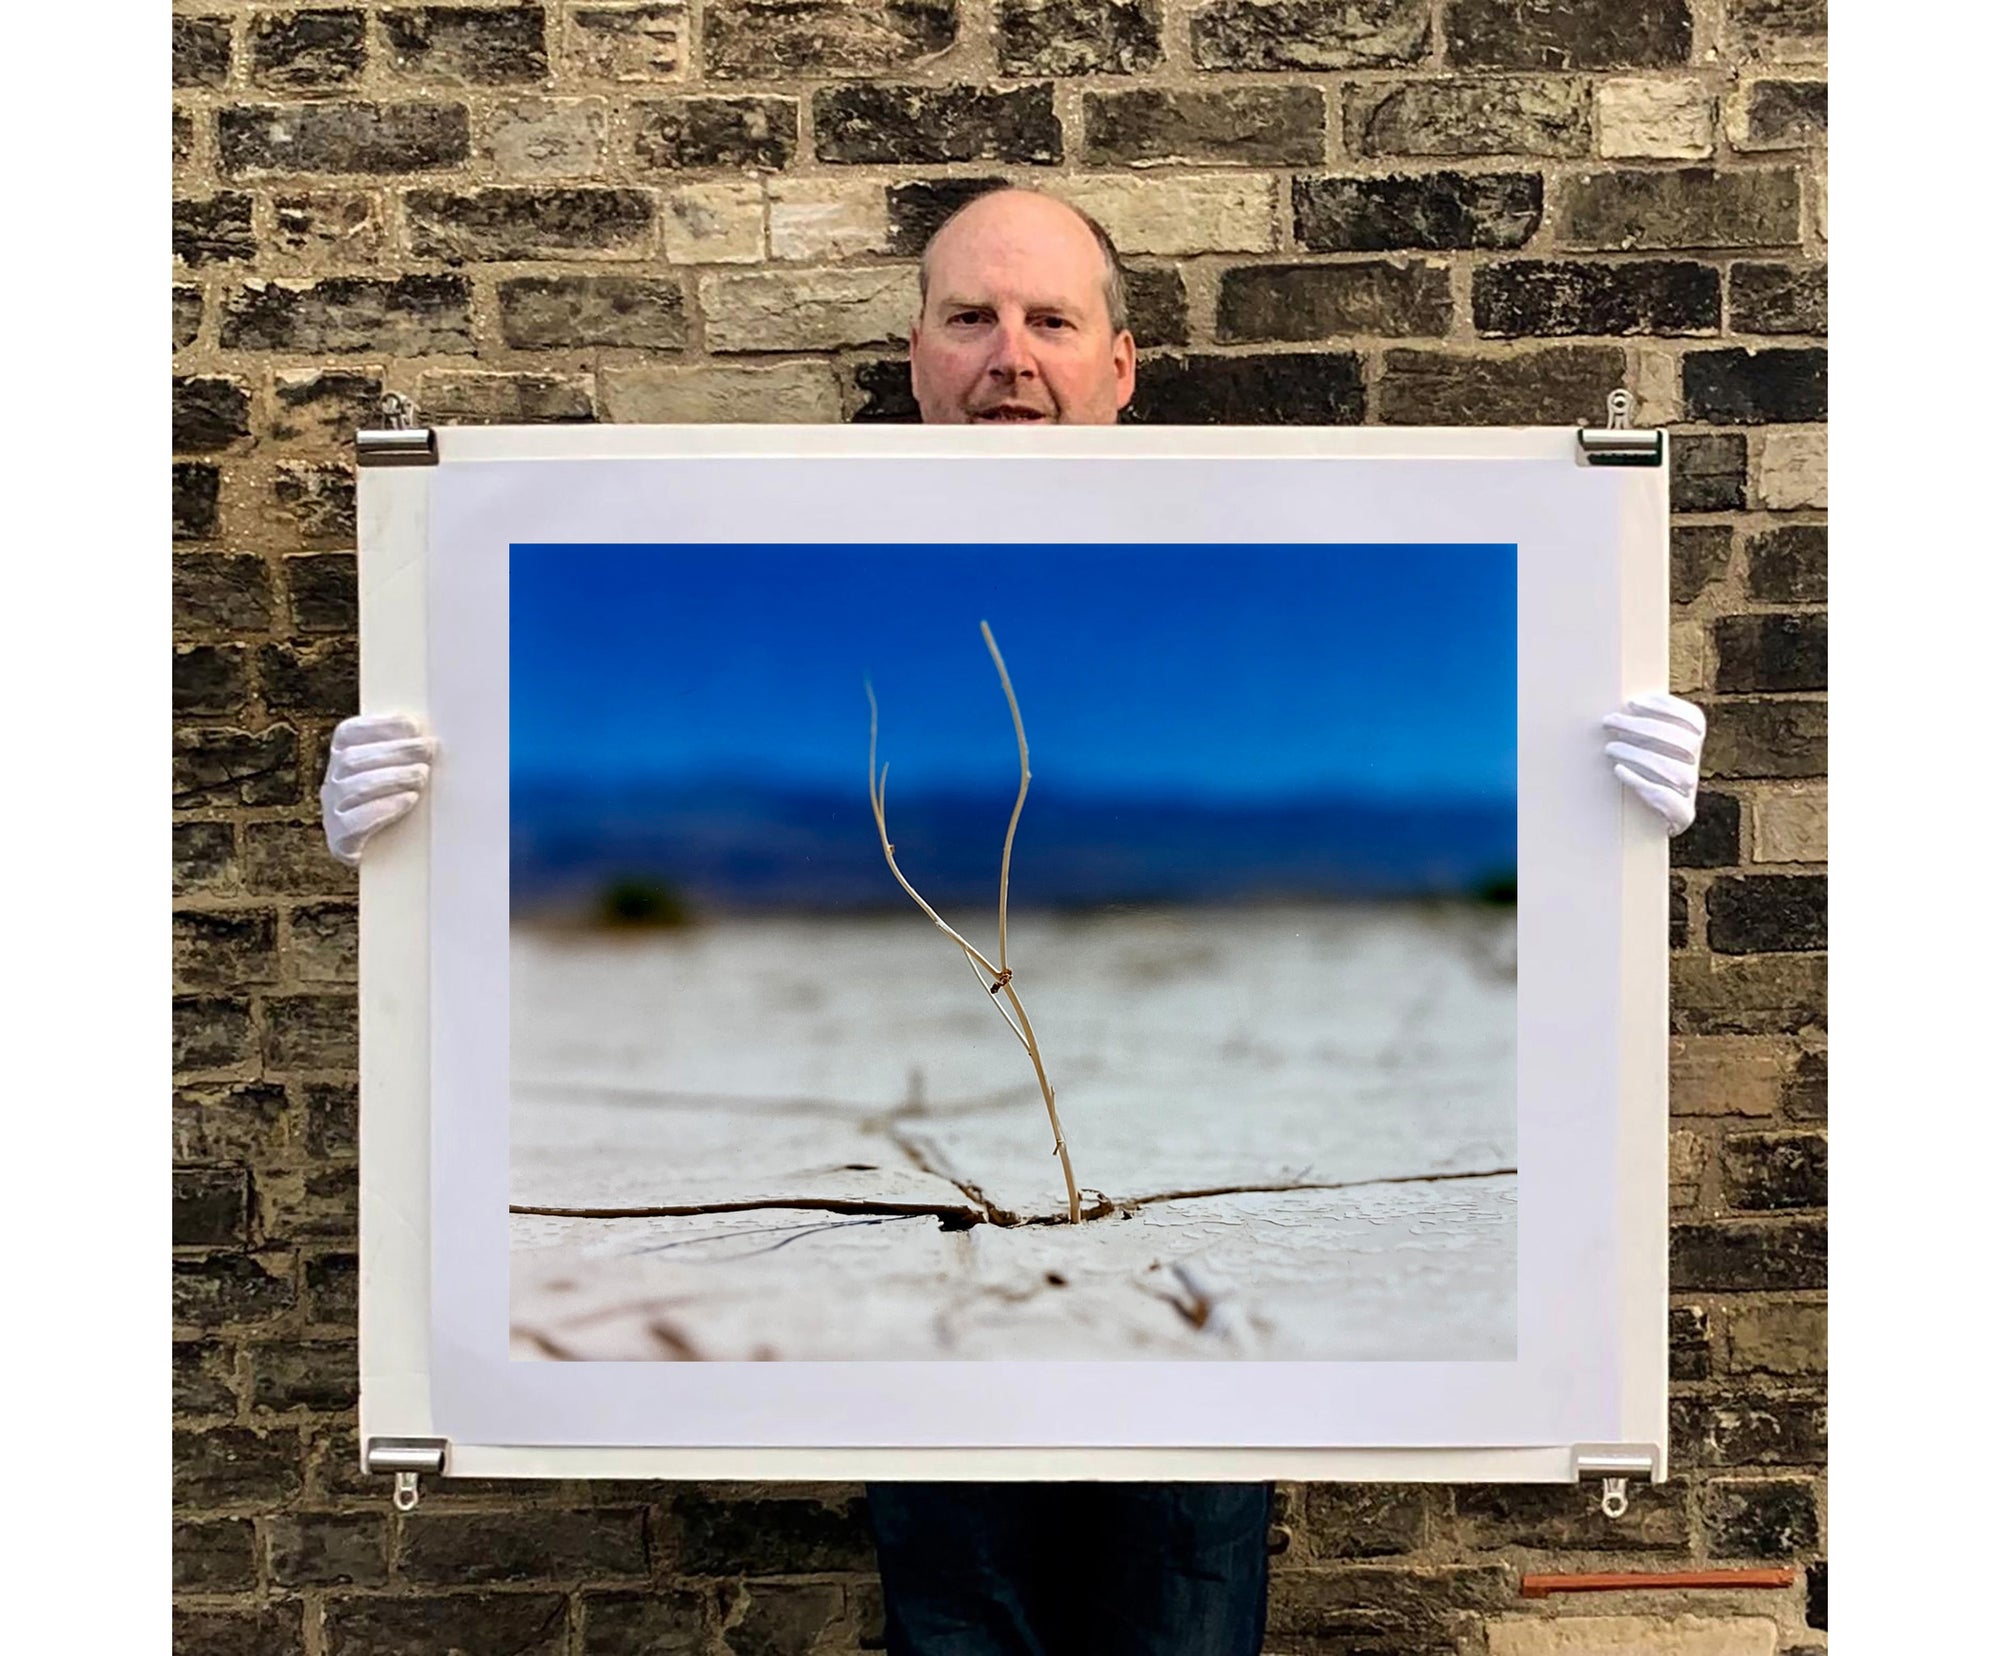 'Florescence', from Richard Heeps' 'Dream in Colour' series was photographed in Panamint Valley, Death Valley National Park, California. This minimal landscape photograph uses a shallow depth of field emphasises a lone twig, a small sign of life, against a deep blue sky background.